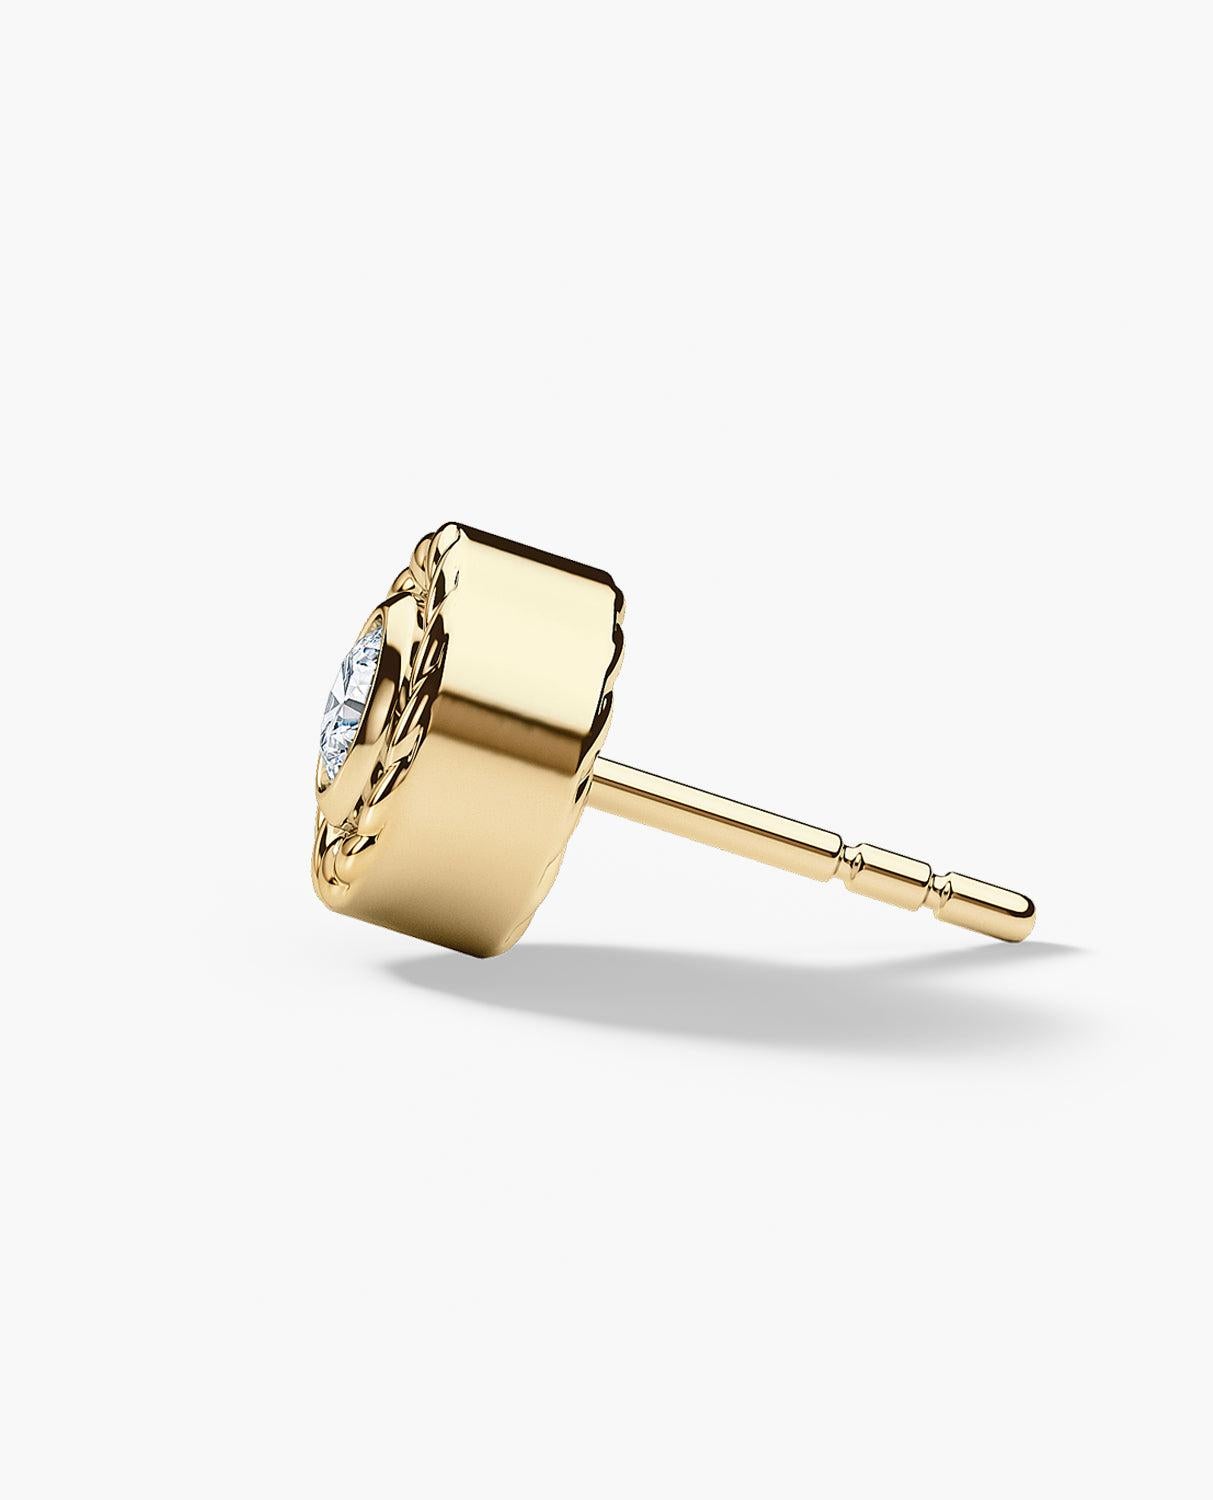 Contemporary 14k Yellow Gold Single Round Stud Earring with 0.20ct Diamond